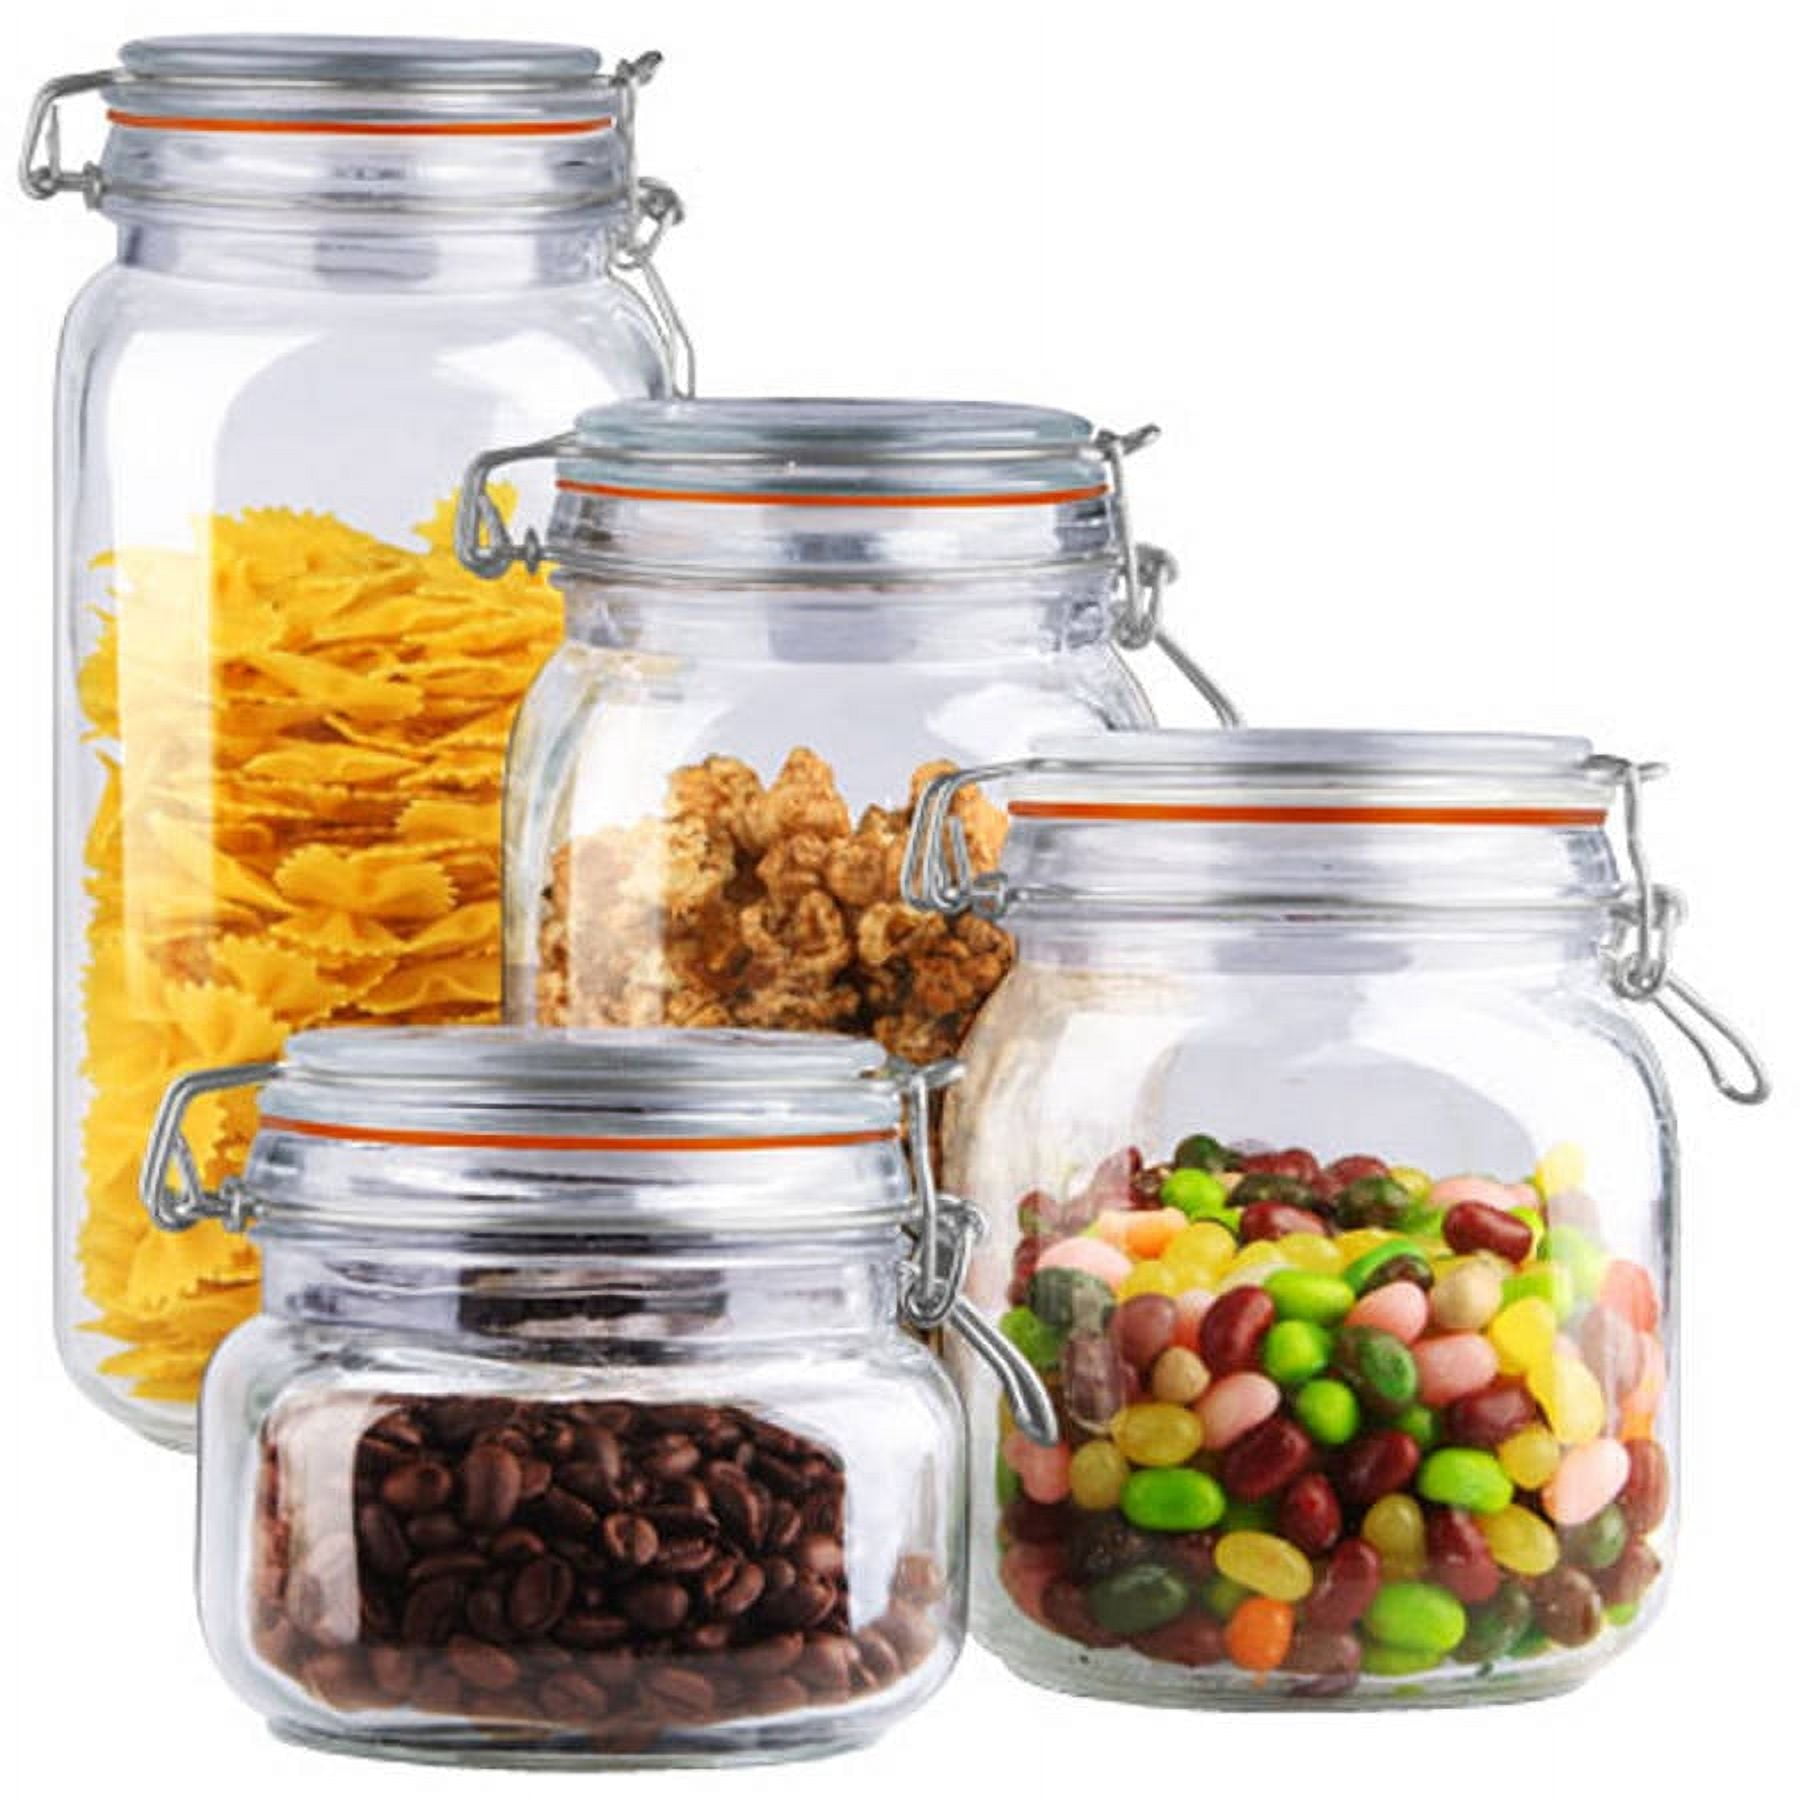 Home Basics 25 oz. Small Round Glass Canister With Stainless